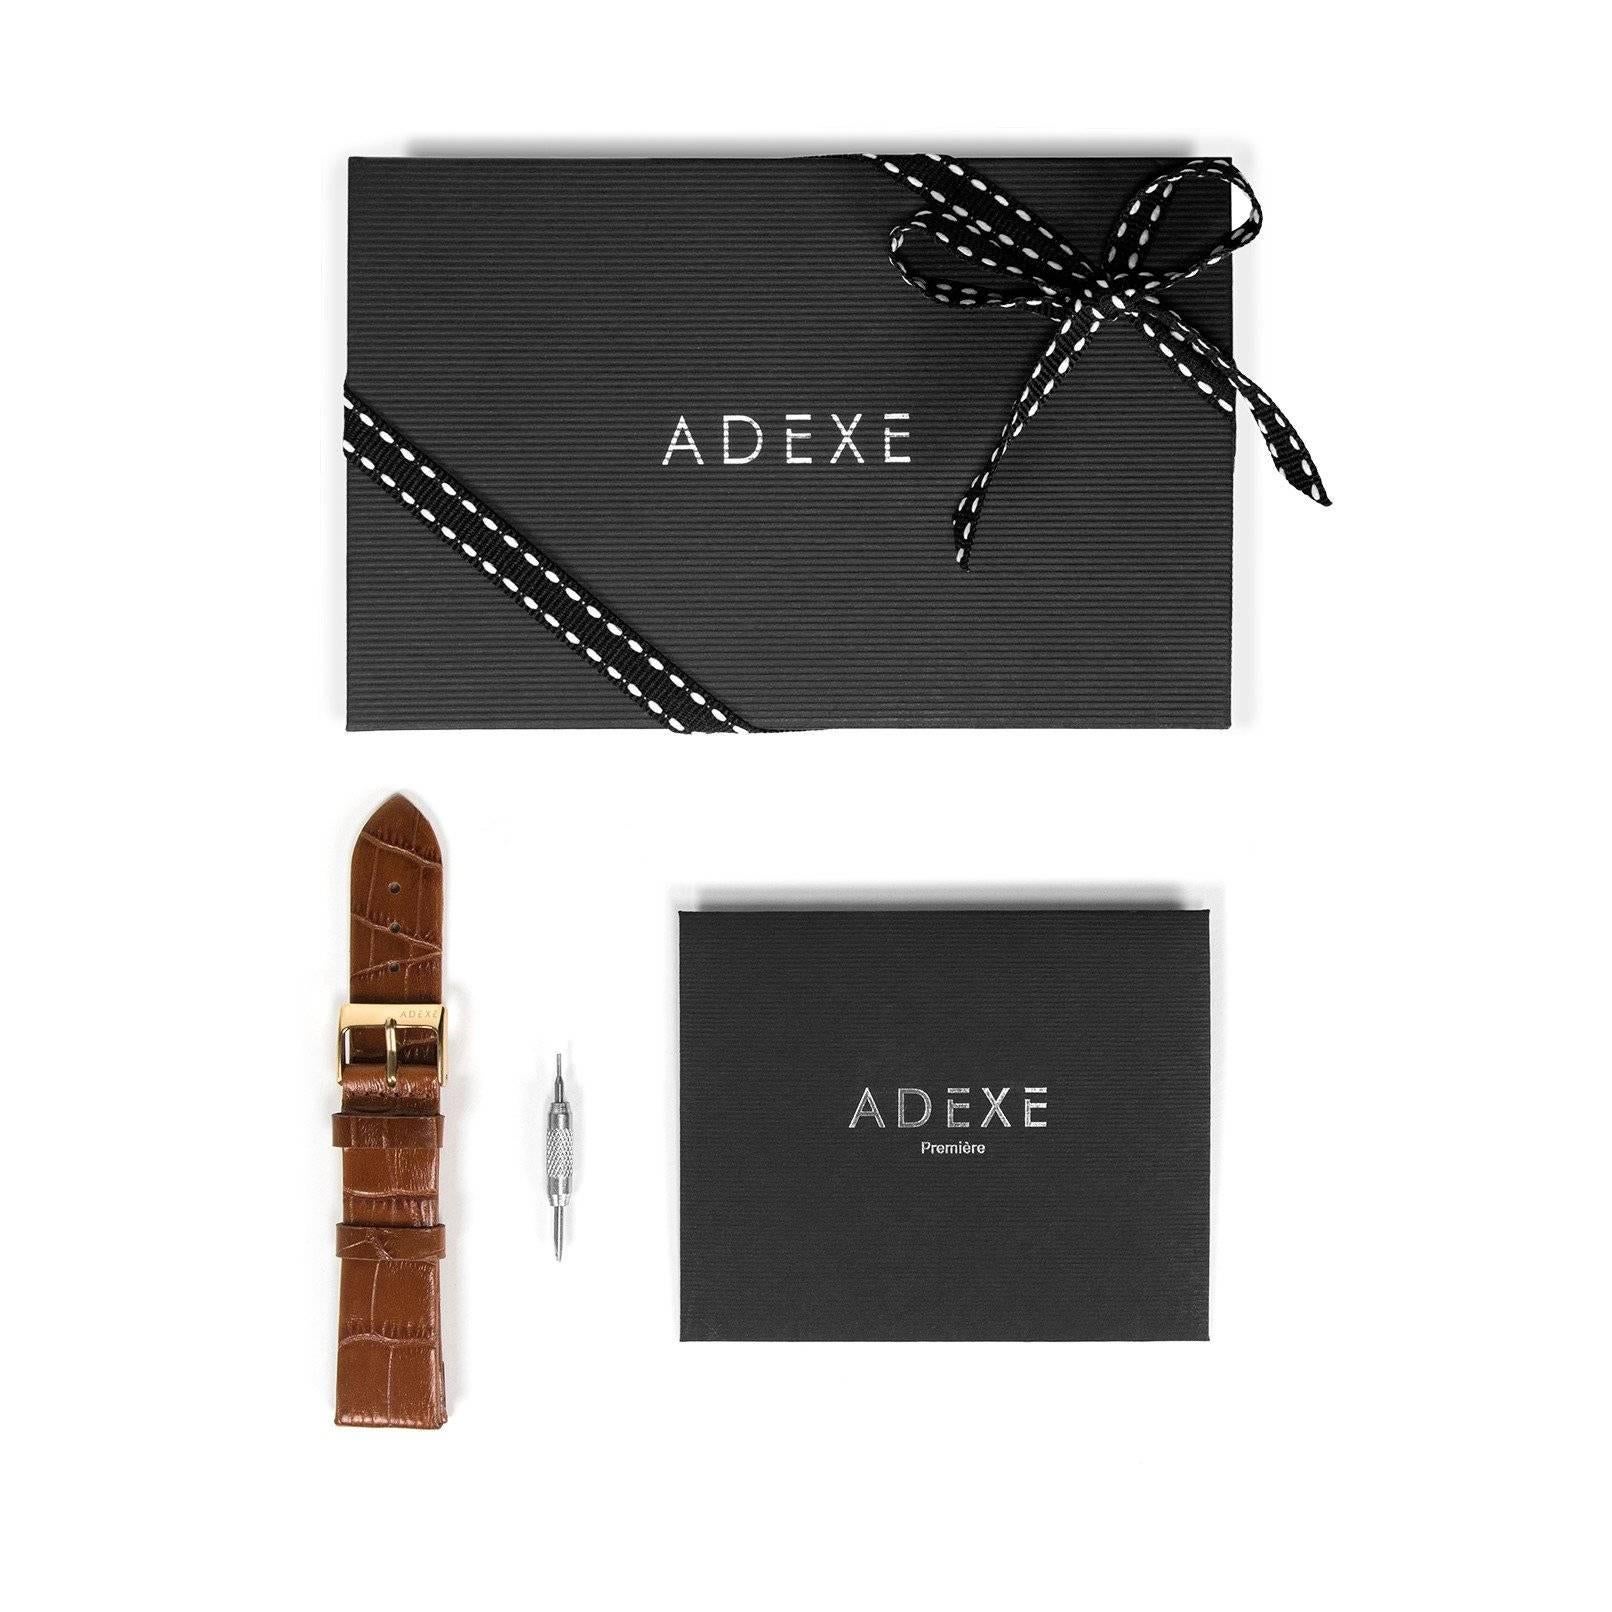  ADEXE Stainless Steel Meek Petite Quartz Wristwatch In New Condition For Sale In London, GB